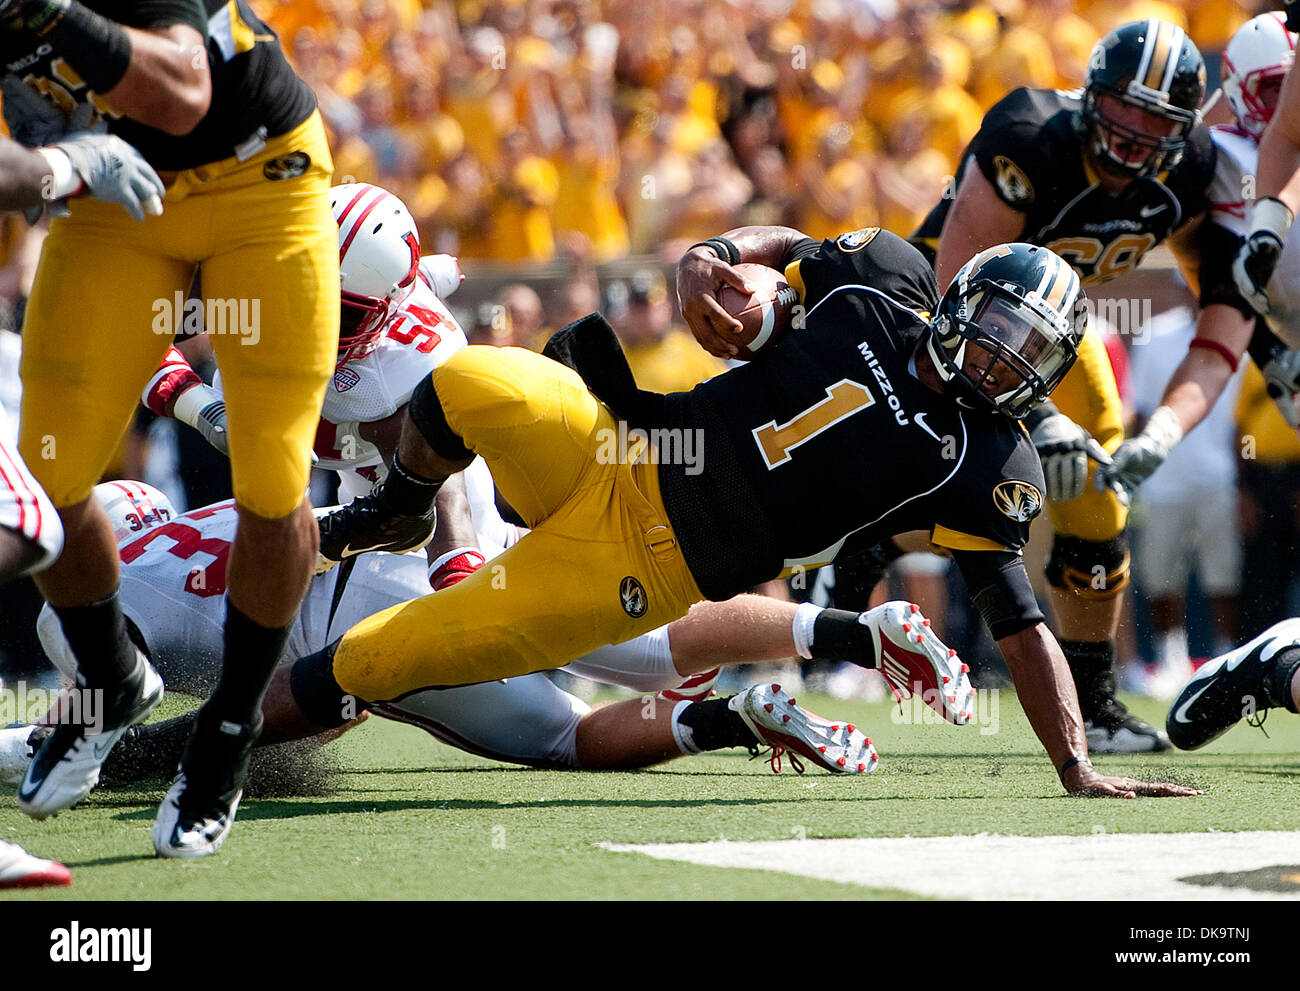 Sep. 03, 2011 - Columbia, Missouri, U.S. - JAMES FRANKLIN, Missouri's new starting quarterback falls into the endzone for the Tiger's and his first touchdown with him as a starter at Faurot Field. (Credit Image: © Grant Hindsley/ZUMA Press) Stock Photo